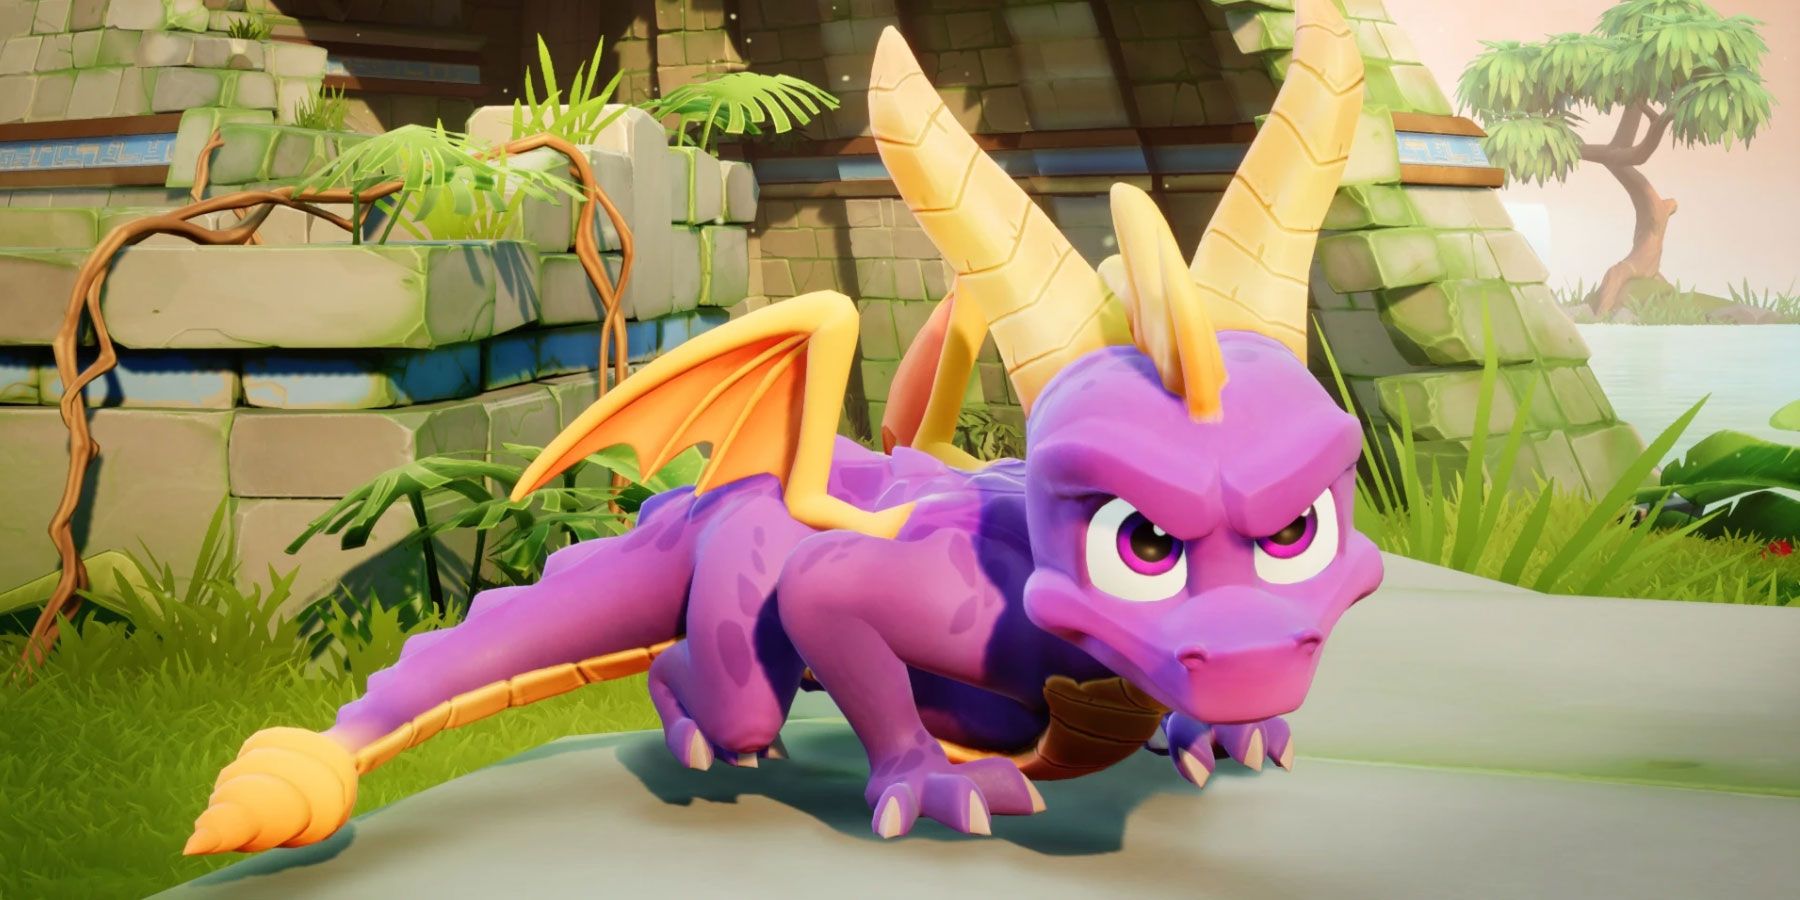 An image of Spyro in front of some ruins from the Spyro Reignited Trilogy.